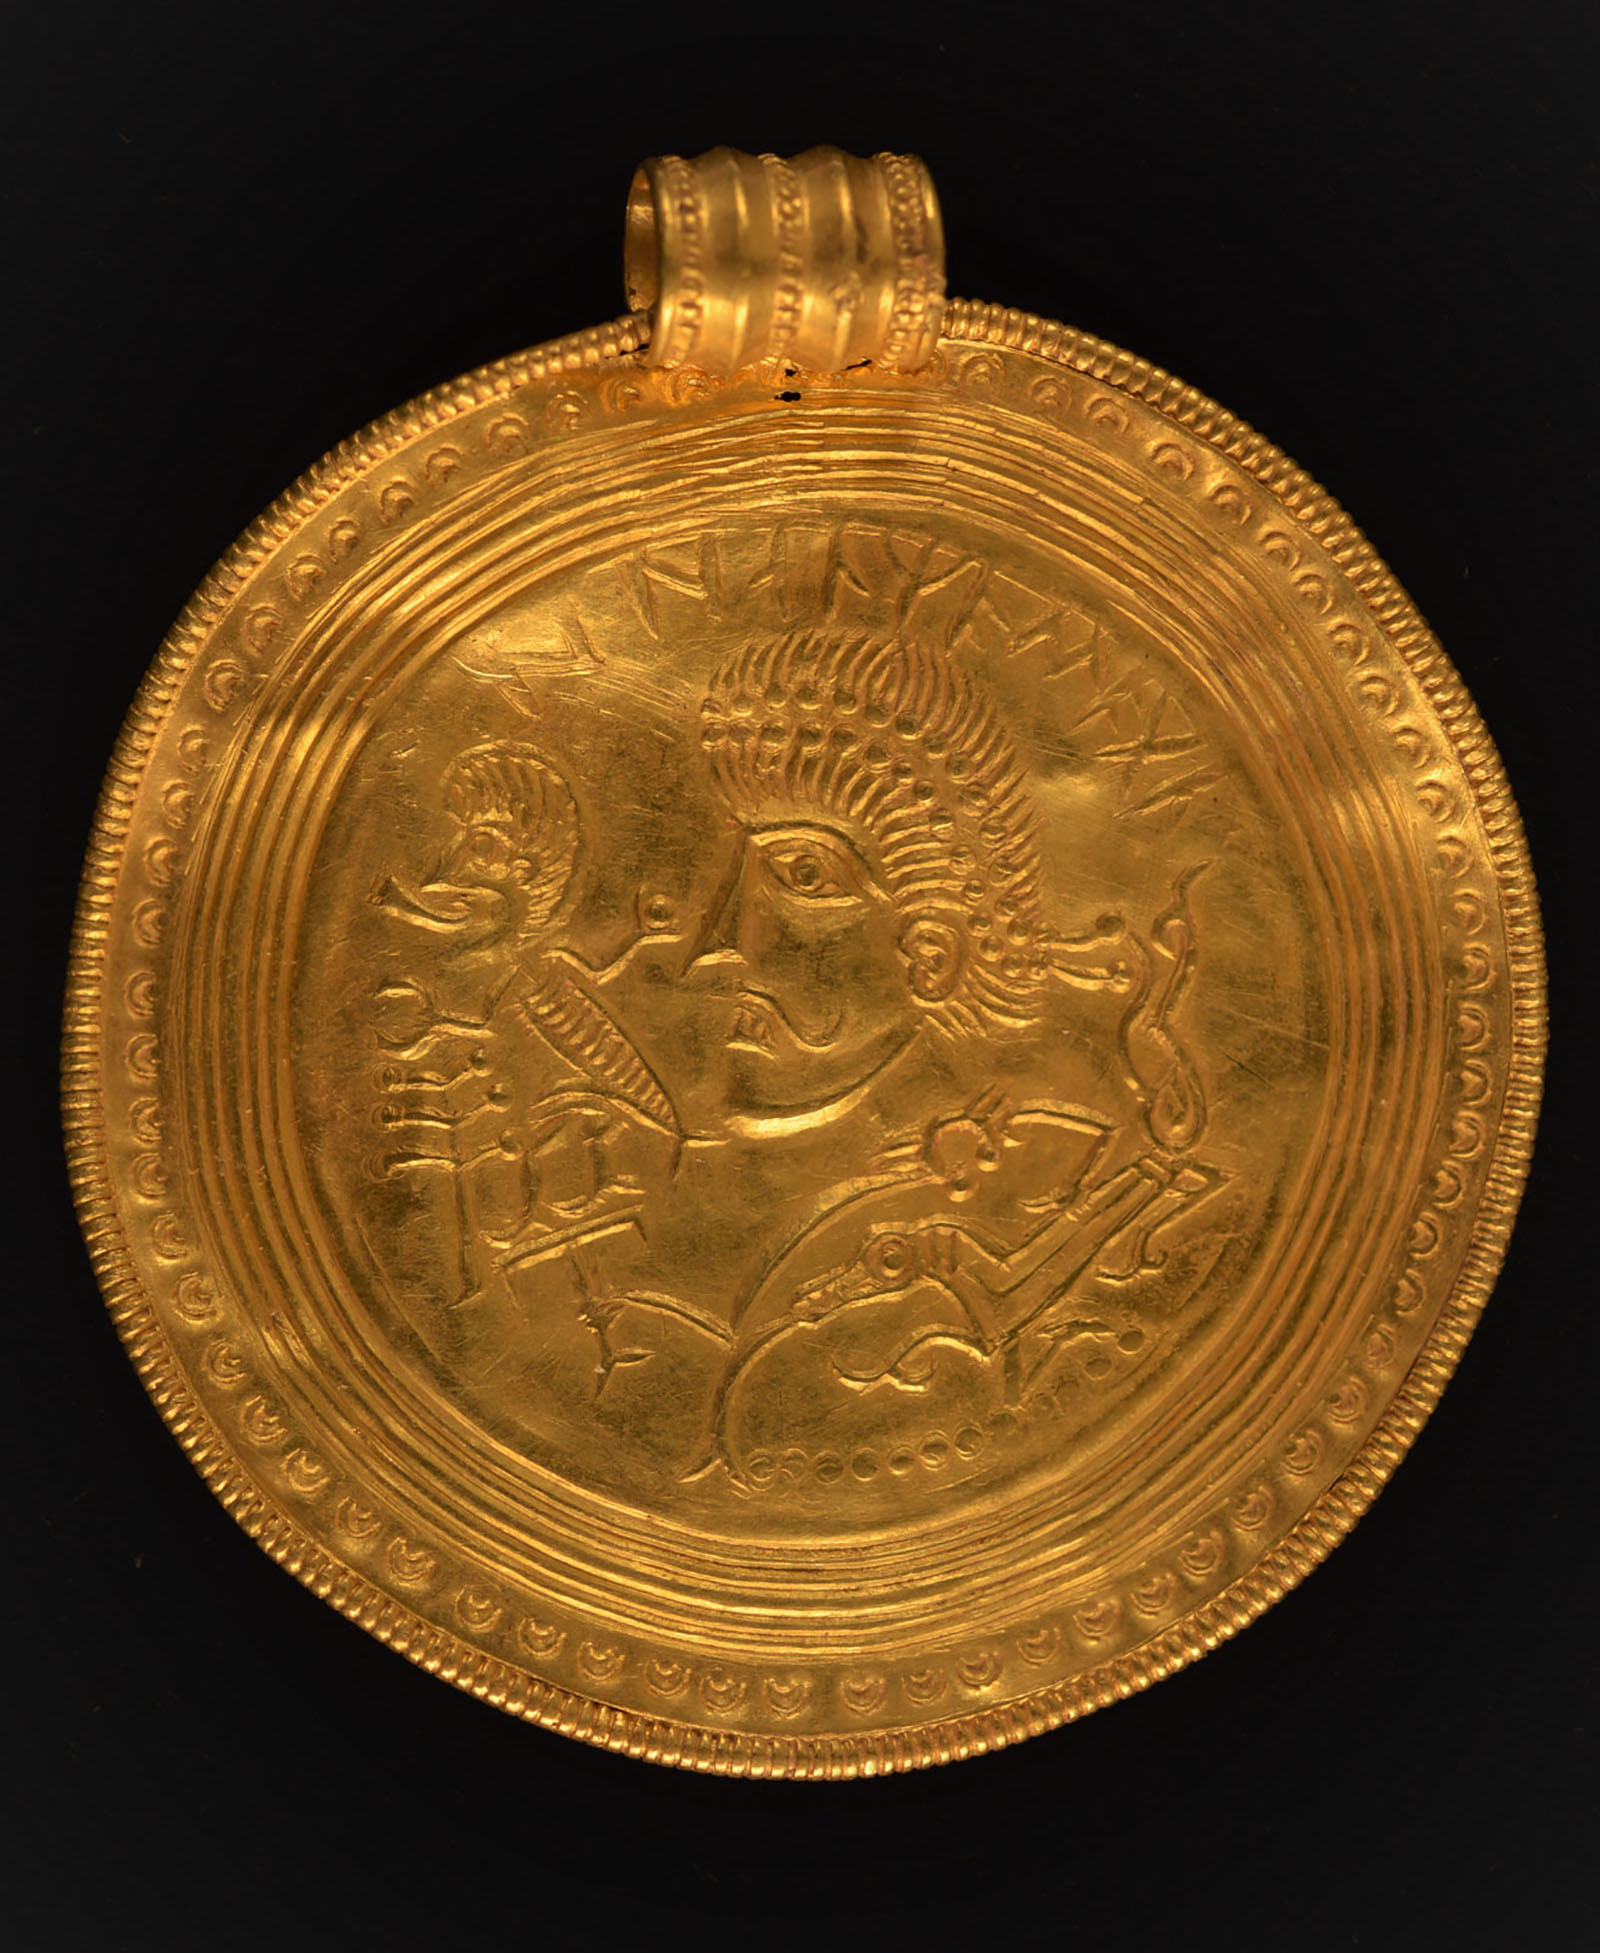 Some of the medallions are as large as saucers.